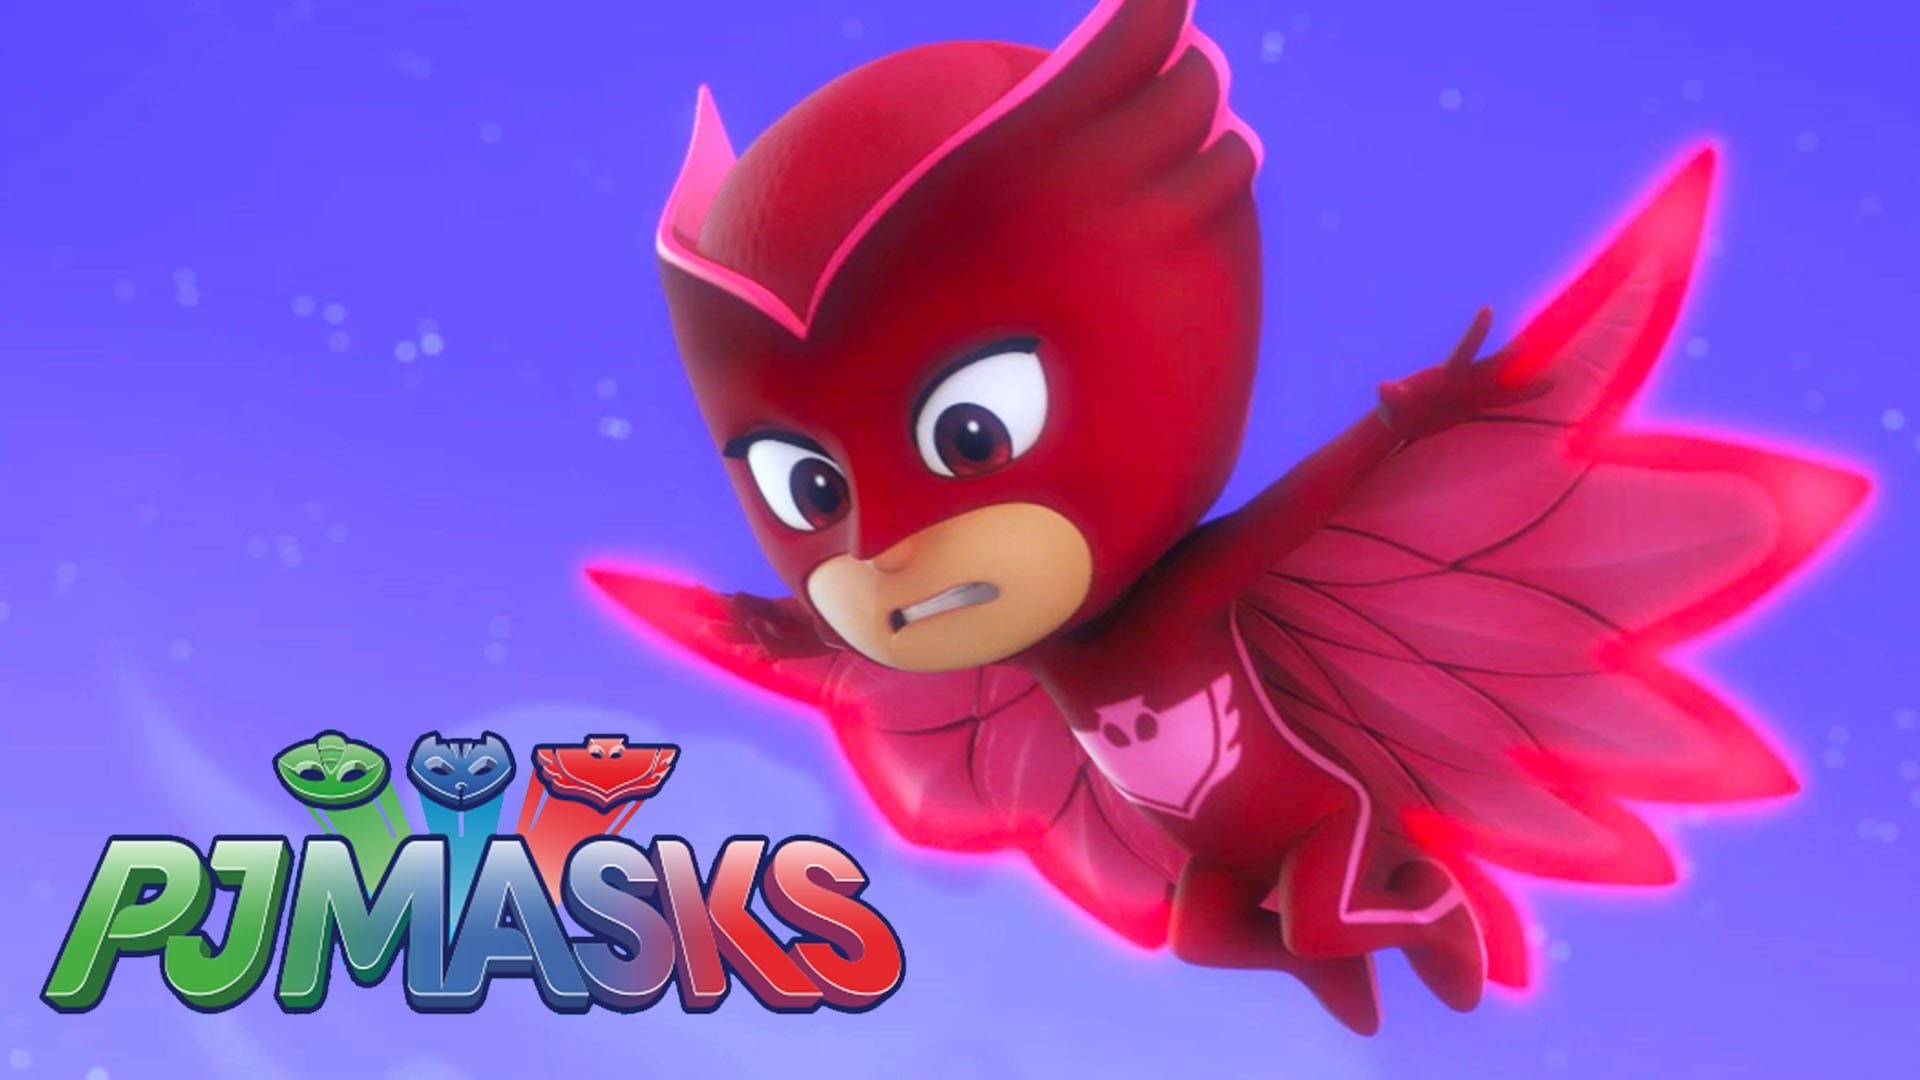 1920x1080 PJ Masks - The One With Owlette's Giving Owl